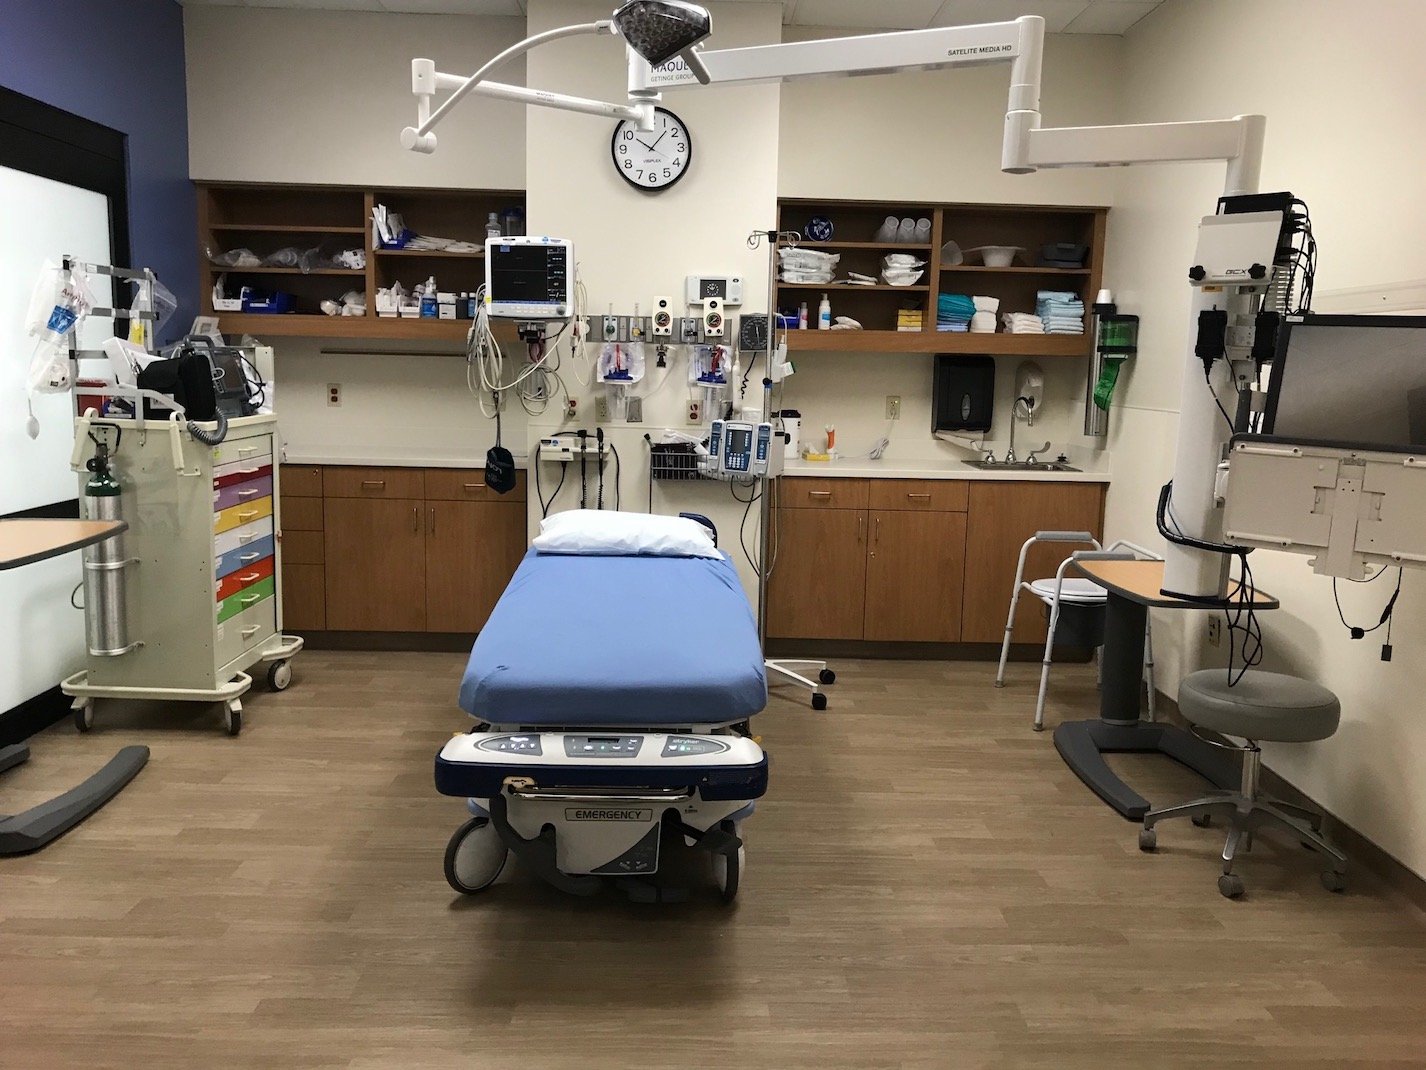 Howard Young Medical Center treatment room